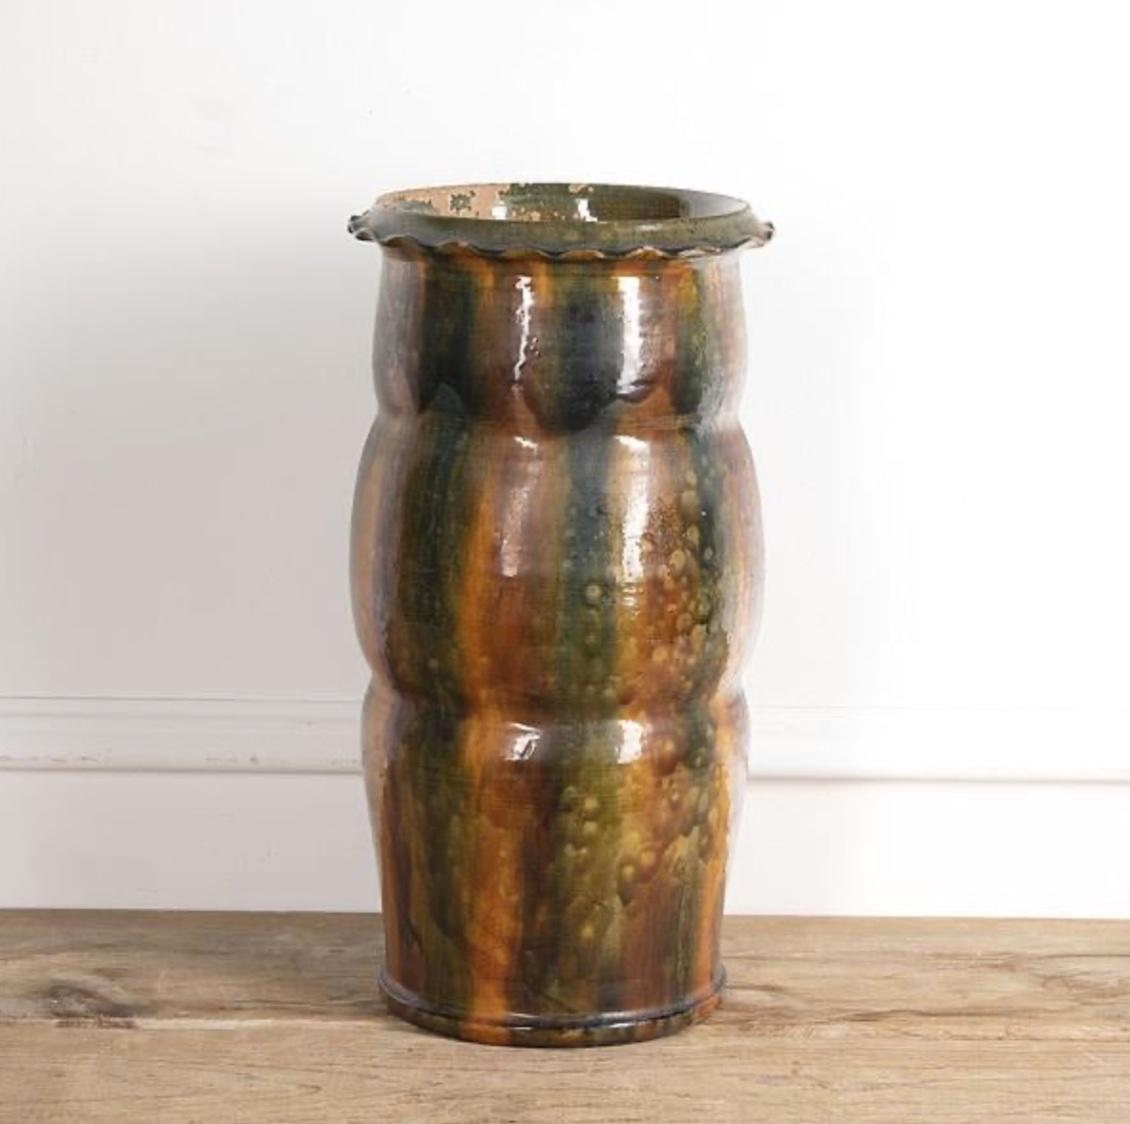 19th century ceramic stick stand with persimmon and moss toned drip glaze from a studio pottery workshop in France. The organic shape and soft glazing technique gives this versatile piece a lovely rustic feel. 

France, circa 1890

Dimensions: